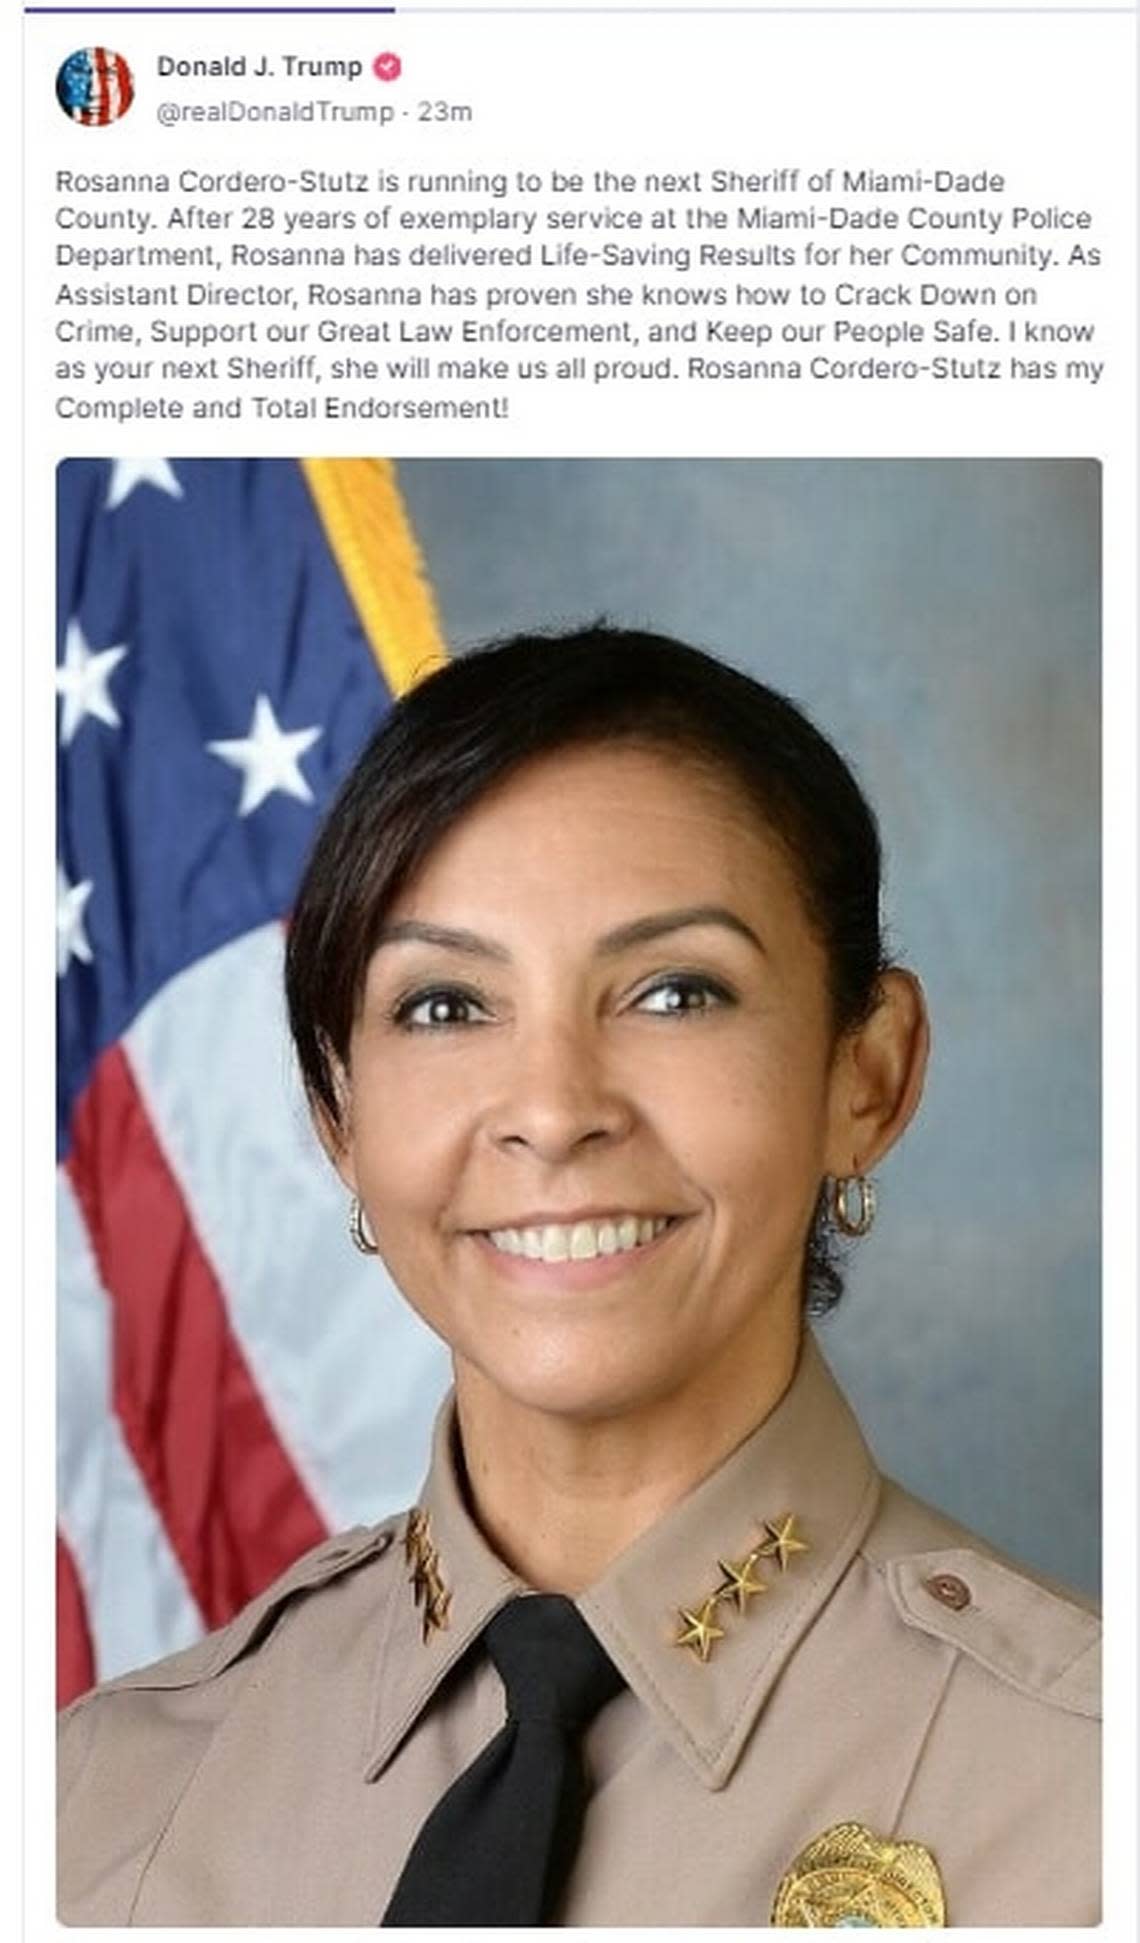 In a Truth Social post on April 24, 2024, former President Donald Trump endorsed a candidate for Miami-Dade County sheriff, Rosanna “Rosie” Cordero-Stutz.